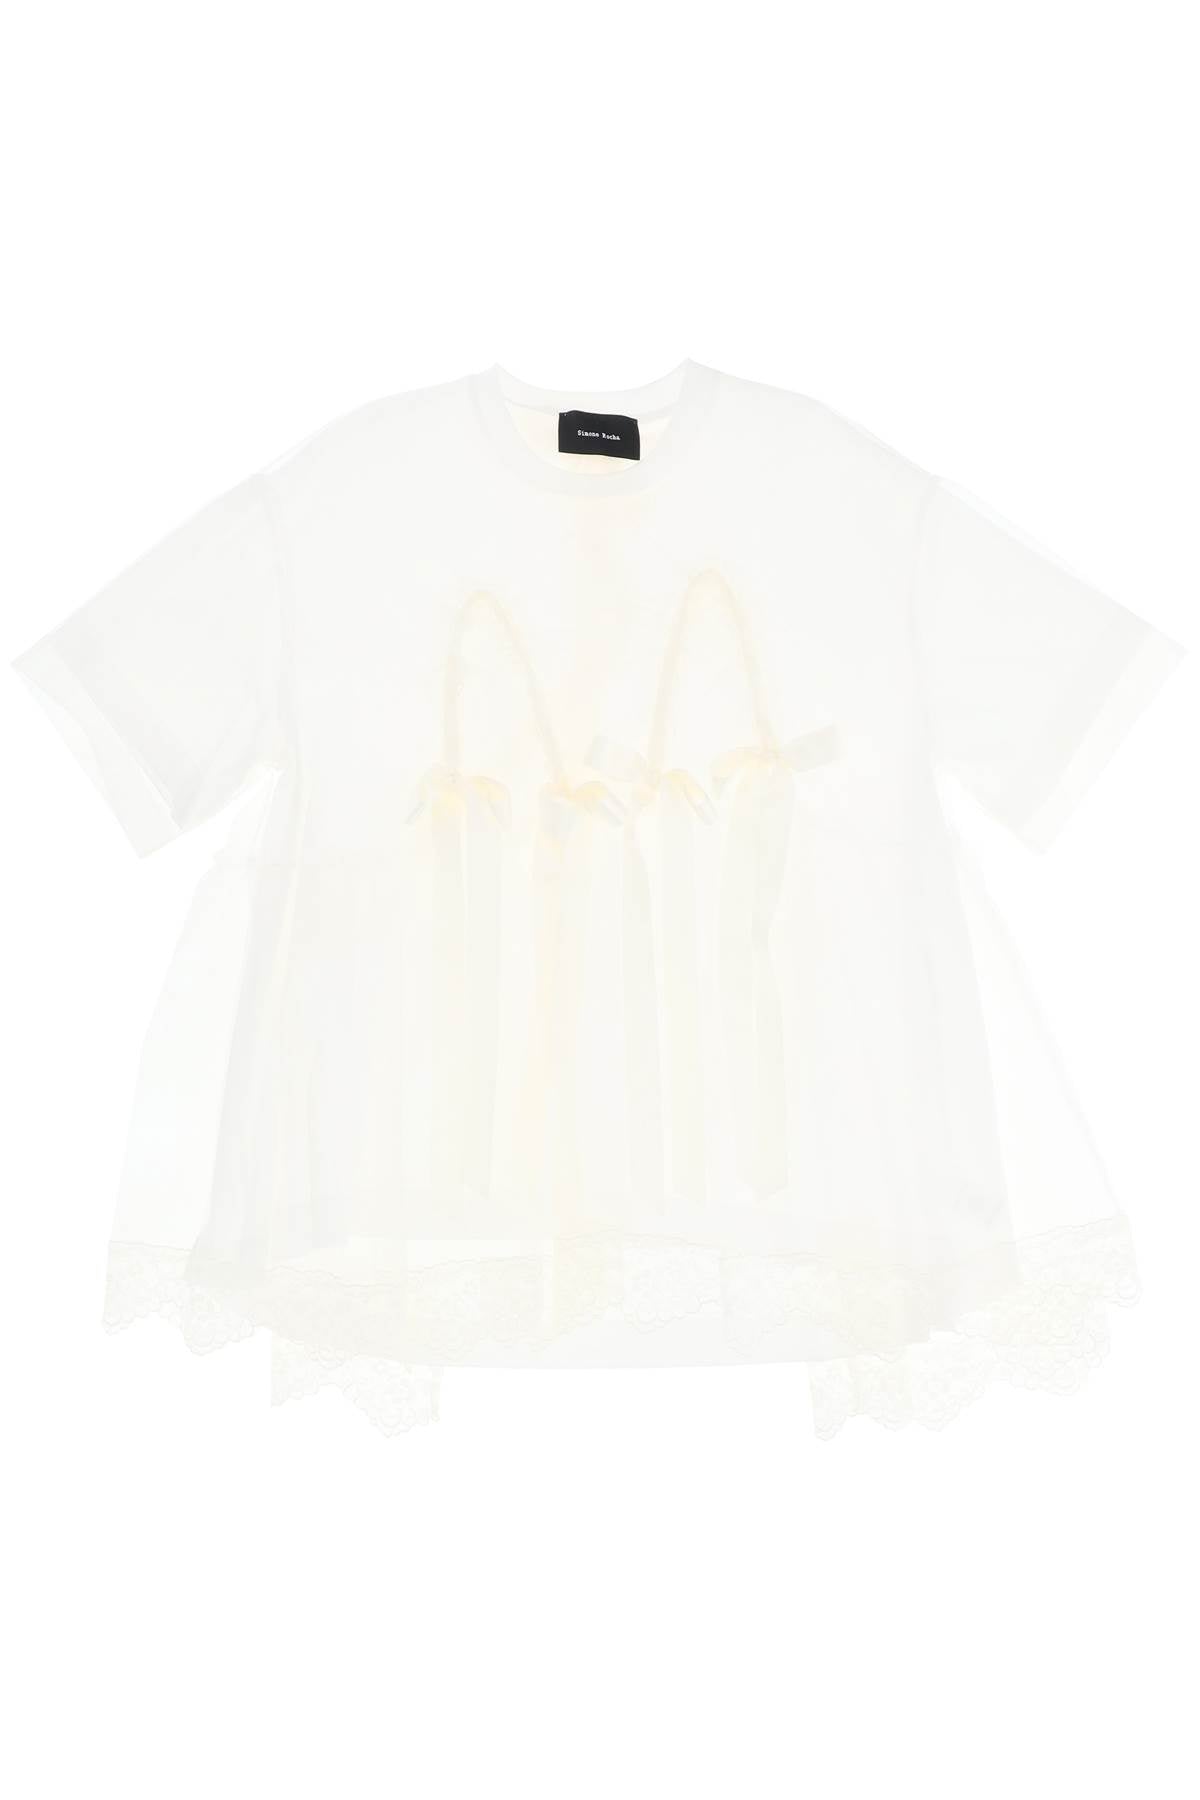 SIMONE ROCHA White Tulle Top with Lace and Bows